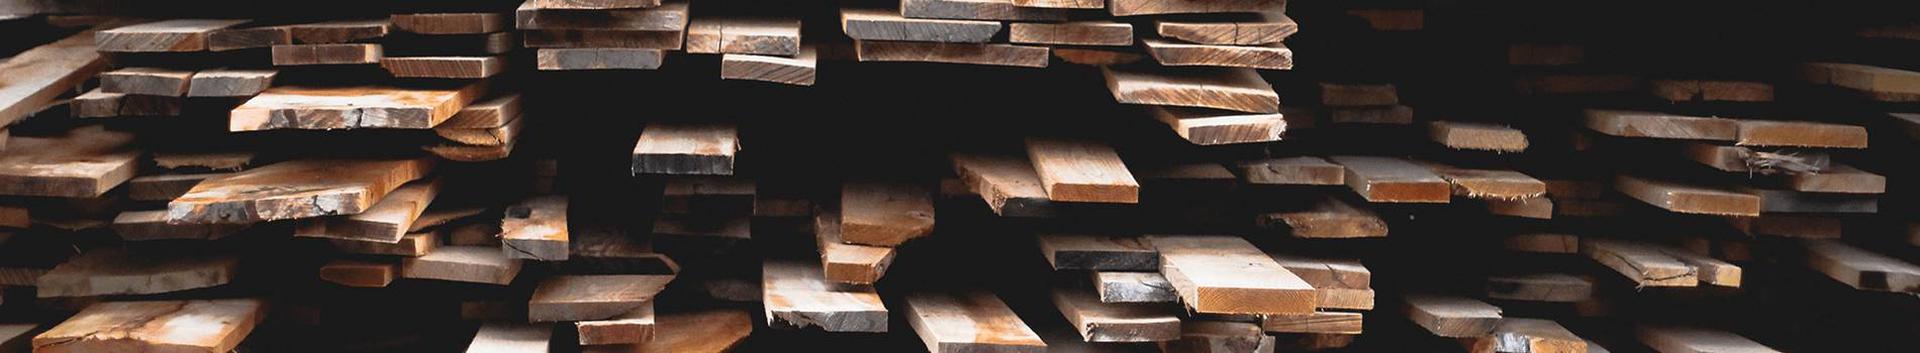 Wood and Paper Industry, Manufacture of lumber